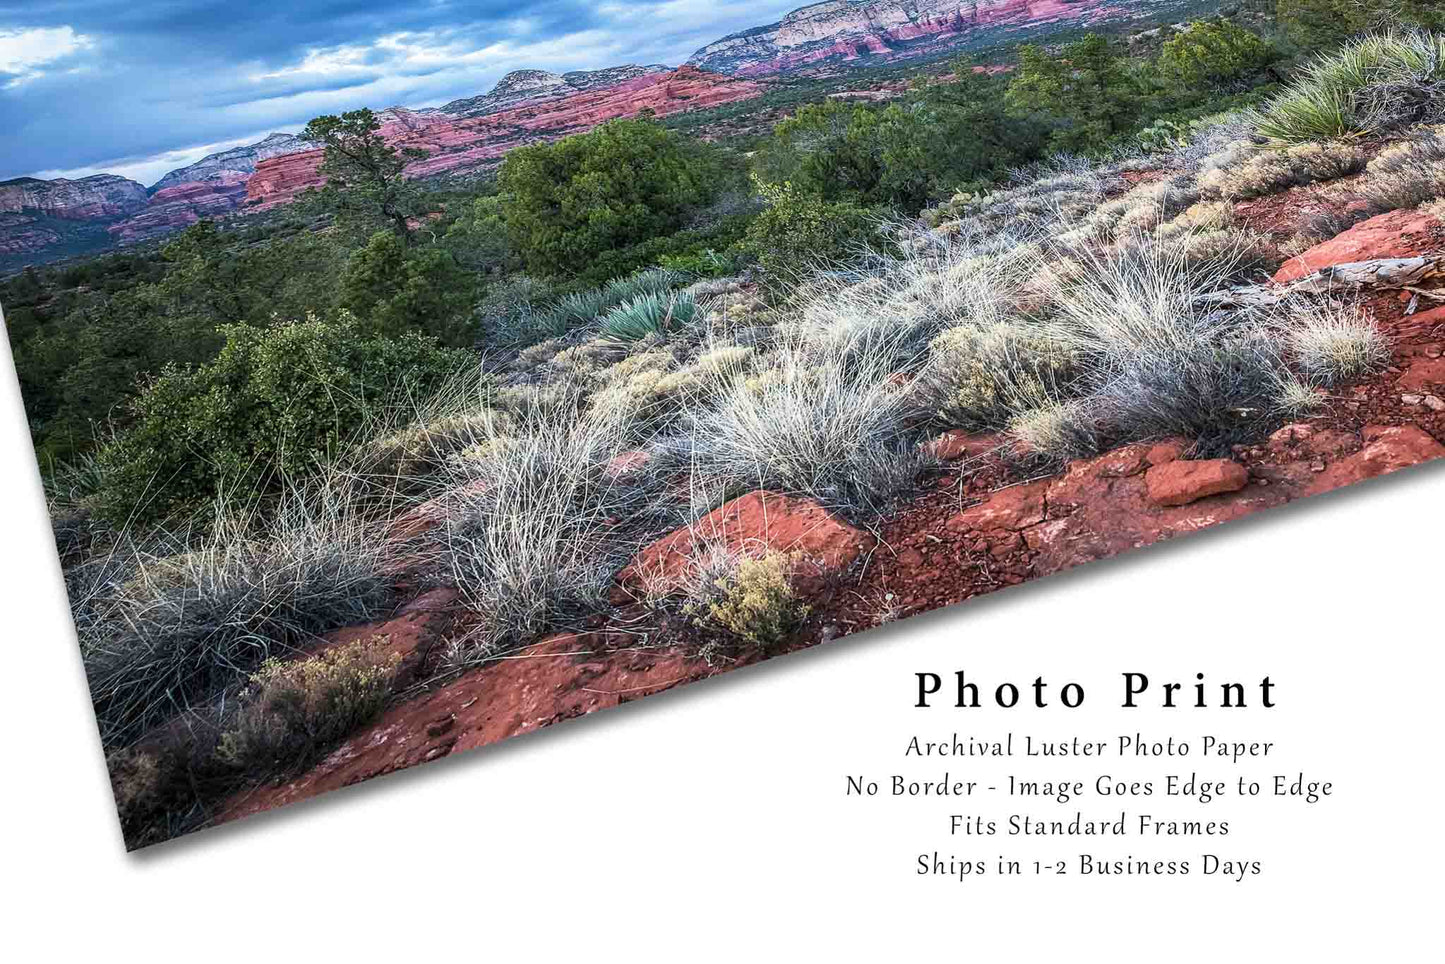 Southwest Photography Wall Art Print - Picture of Mountains and Desert Landscape Near Sedona Arizona Scenic Western Decor 4x6 to 40x60